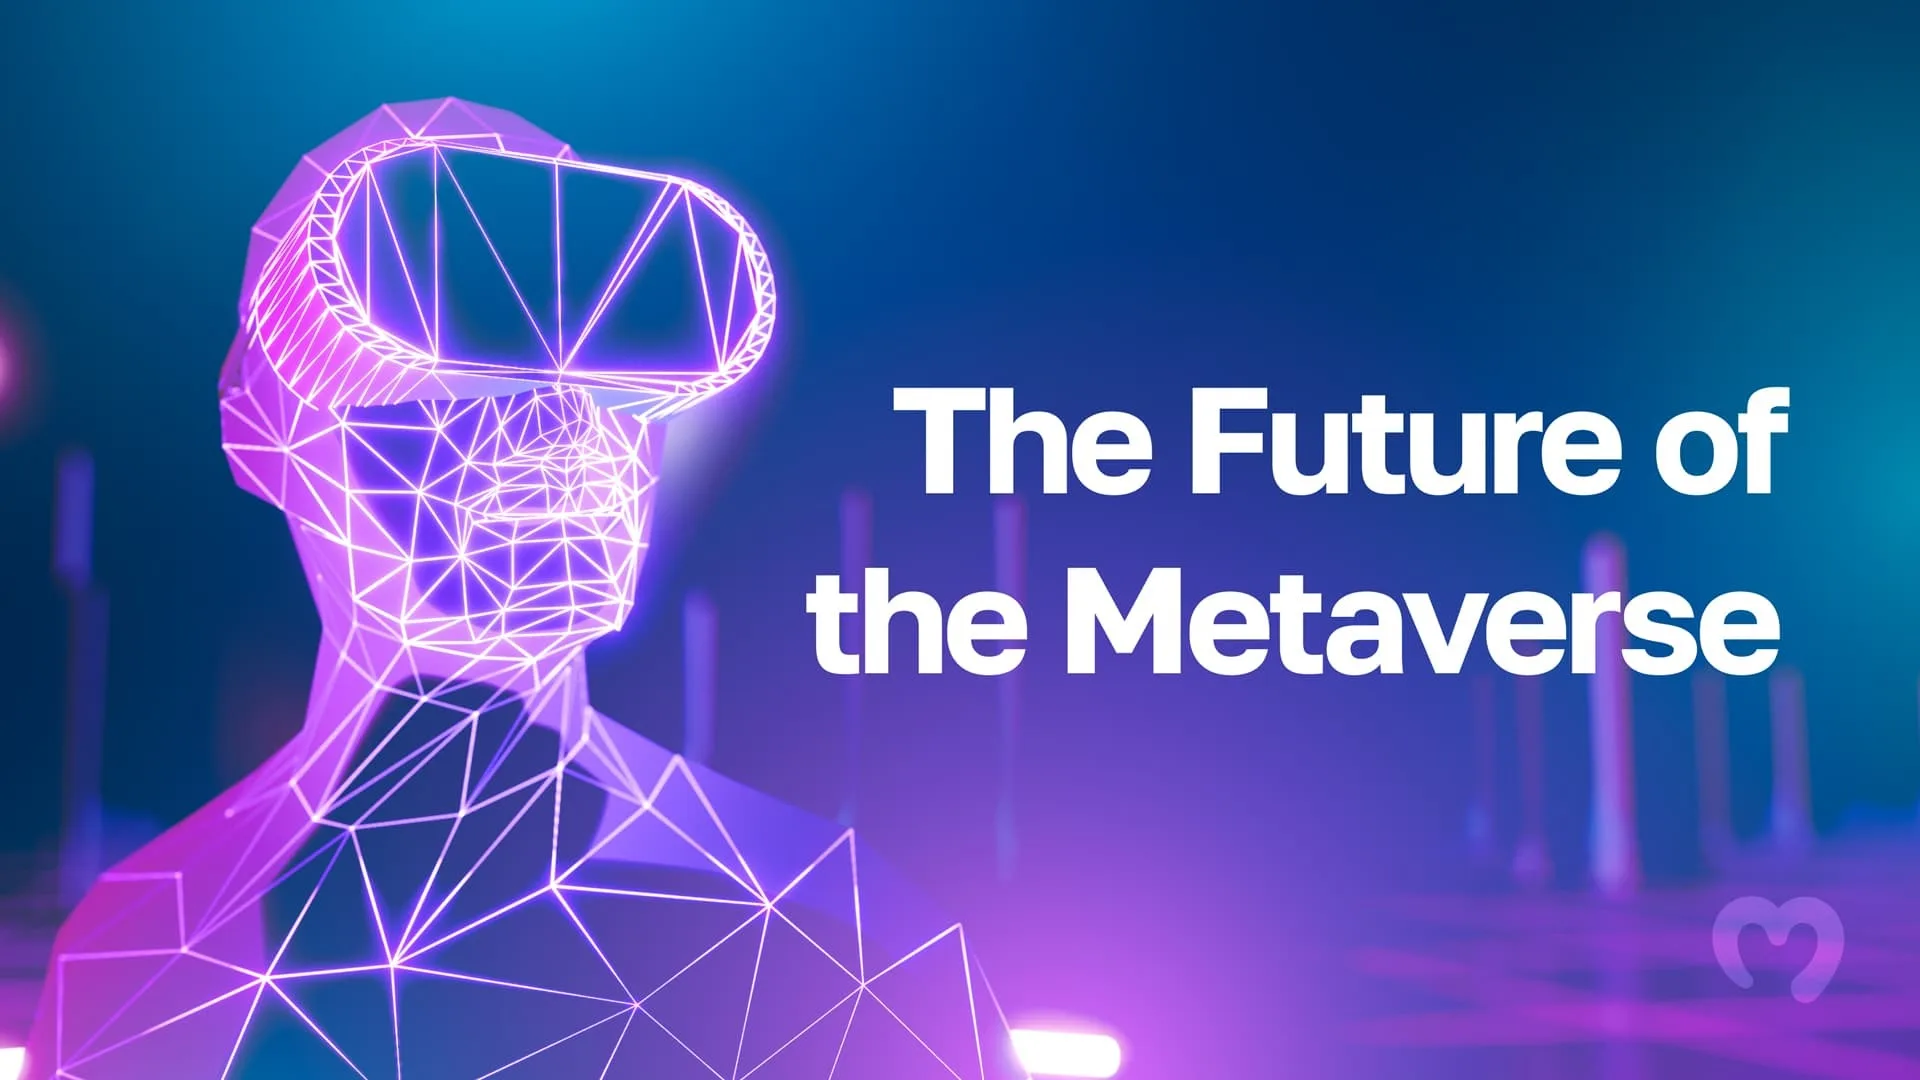 The Future of the Metaverse: Top 7 Positive Insights